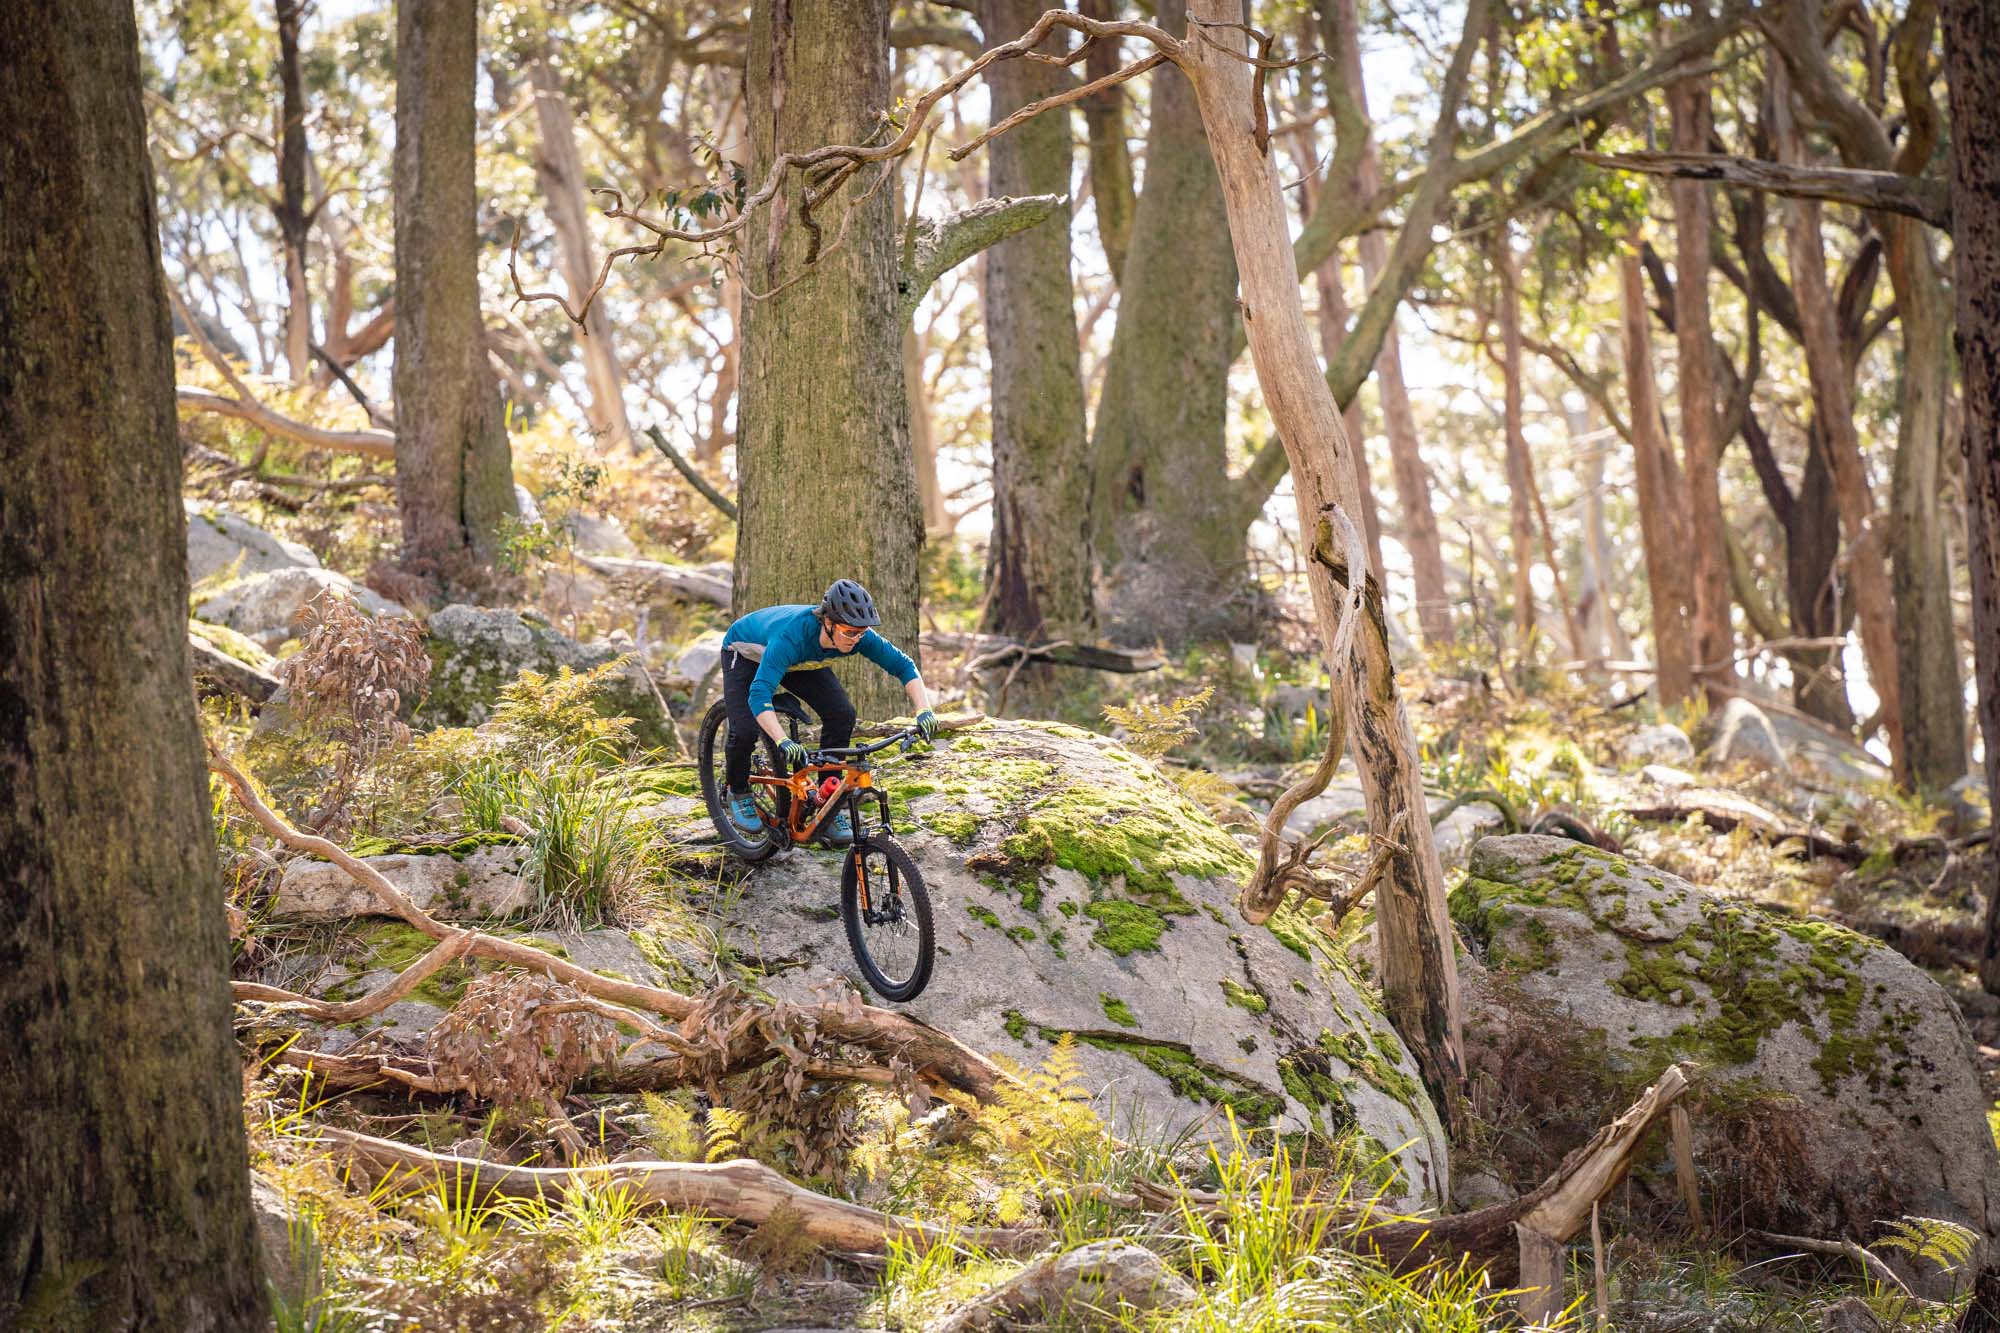 The Trek Slash is also a contender as one of the Best Enduro Bikes